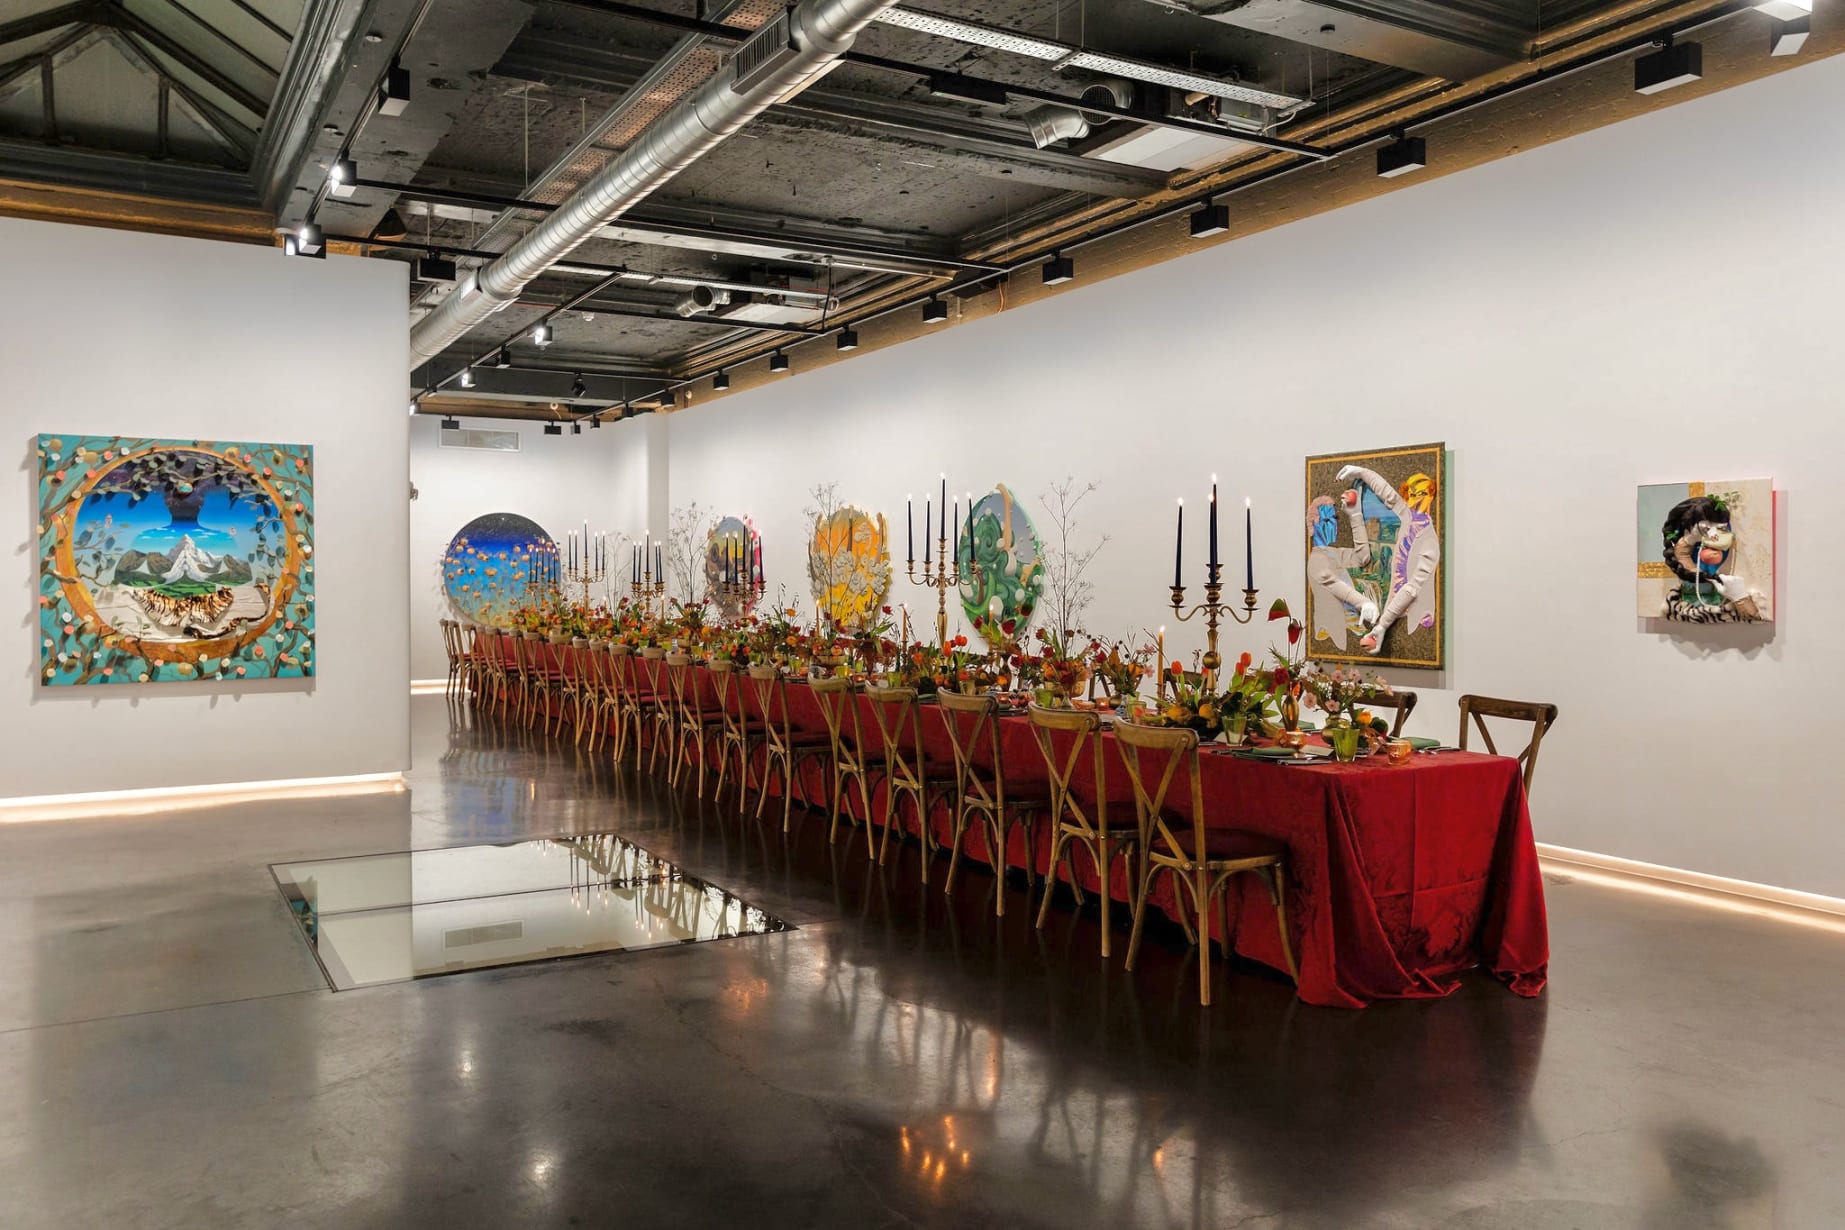 Artist dinner for Miguel Ángel Payano Jr. celebrated Miguel's work and background through the sophisticated Dominican fine-dining menu crafted by...